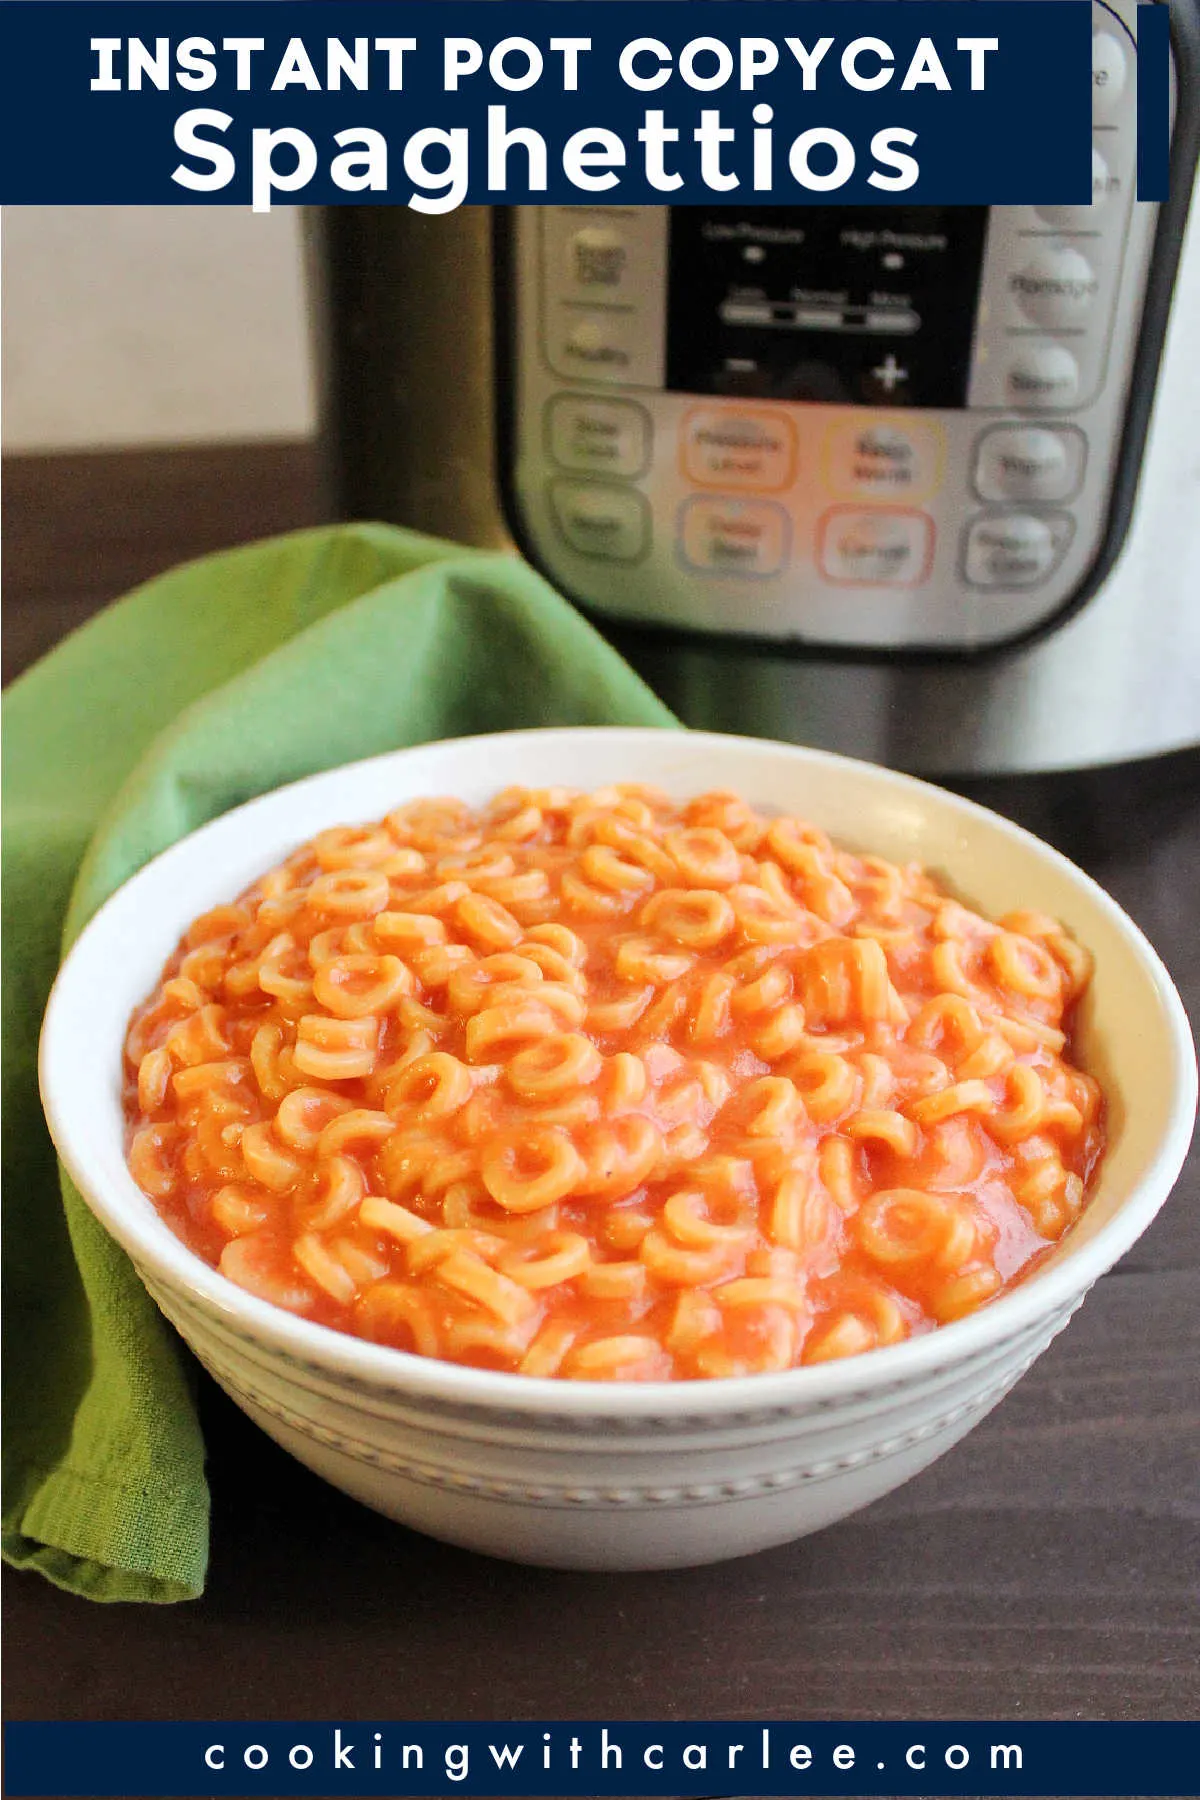 Make homemade Spaghettios in your instant pot. This easy meal will make you relive your childhood in the tastiest kind of way!